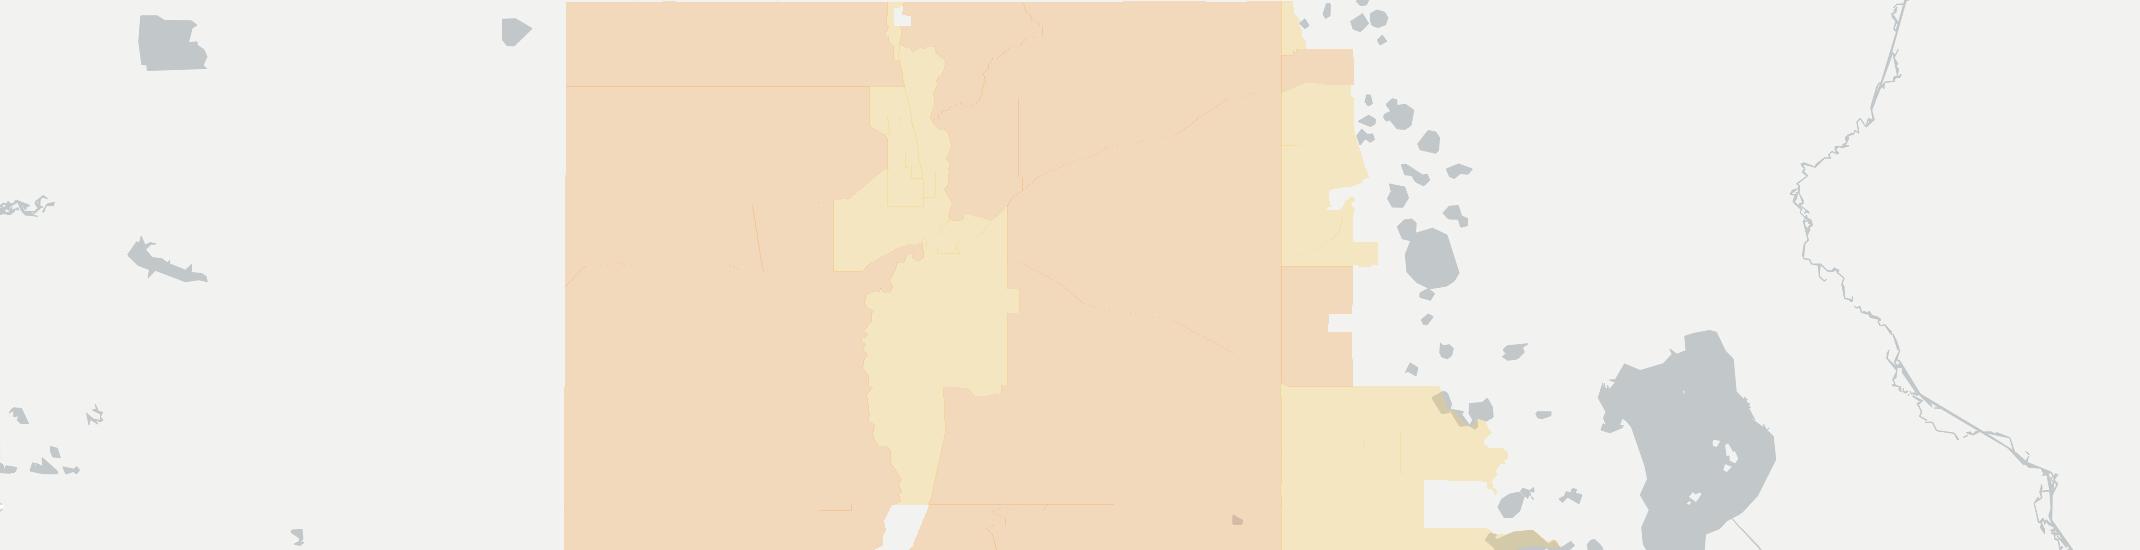 Zolfo Springs Internet Competition Map. Click for interactive map.